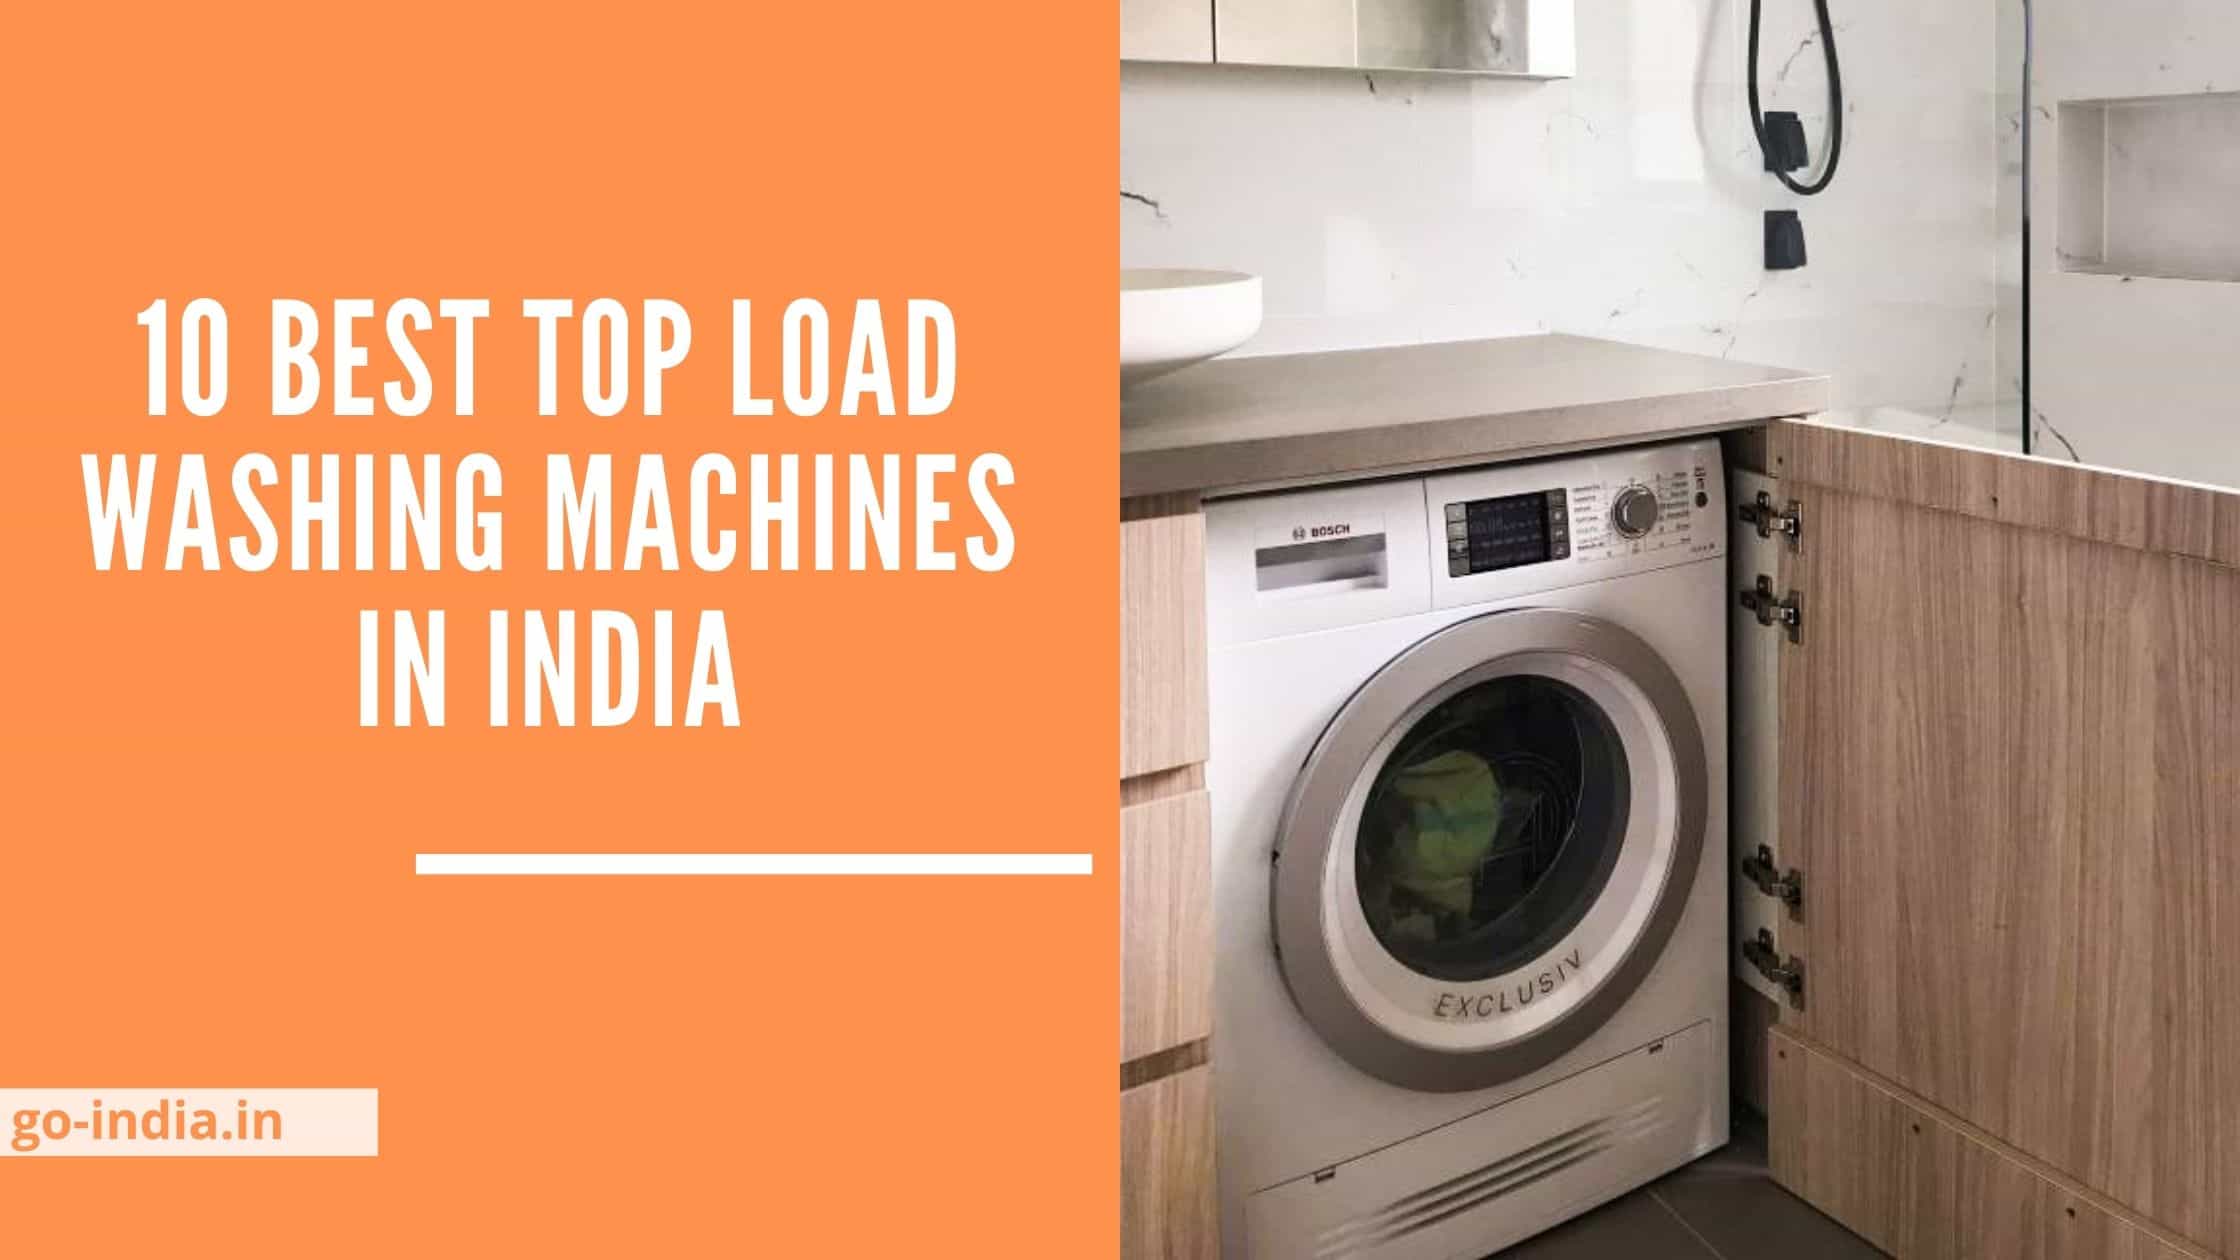 10 Best Top Load Washing Machines in India 2022 (Fully Automatic)